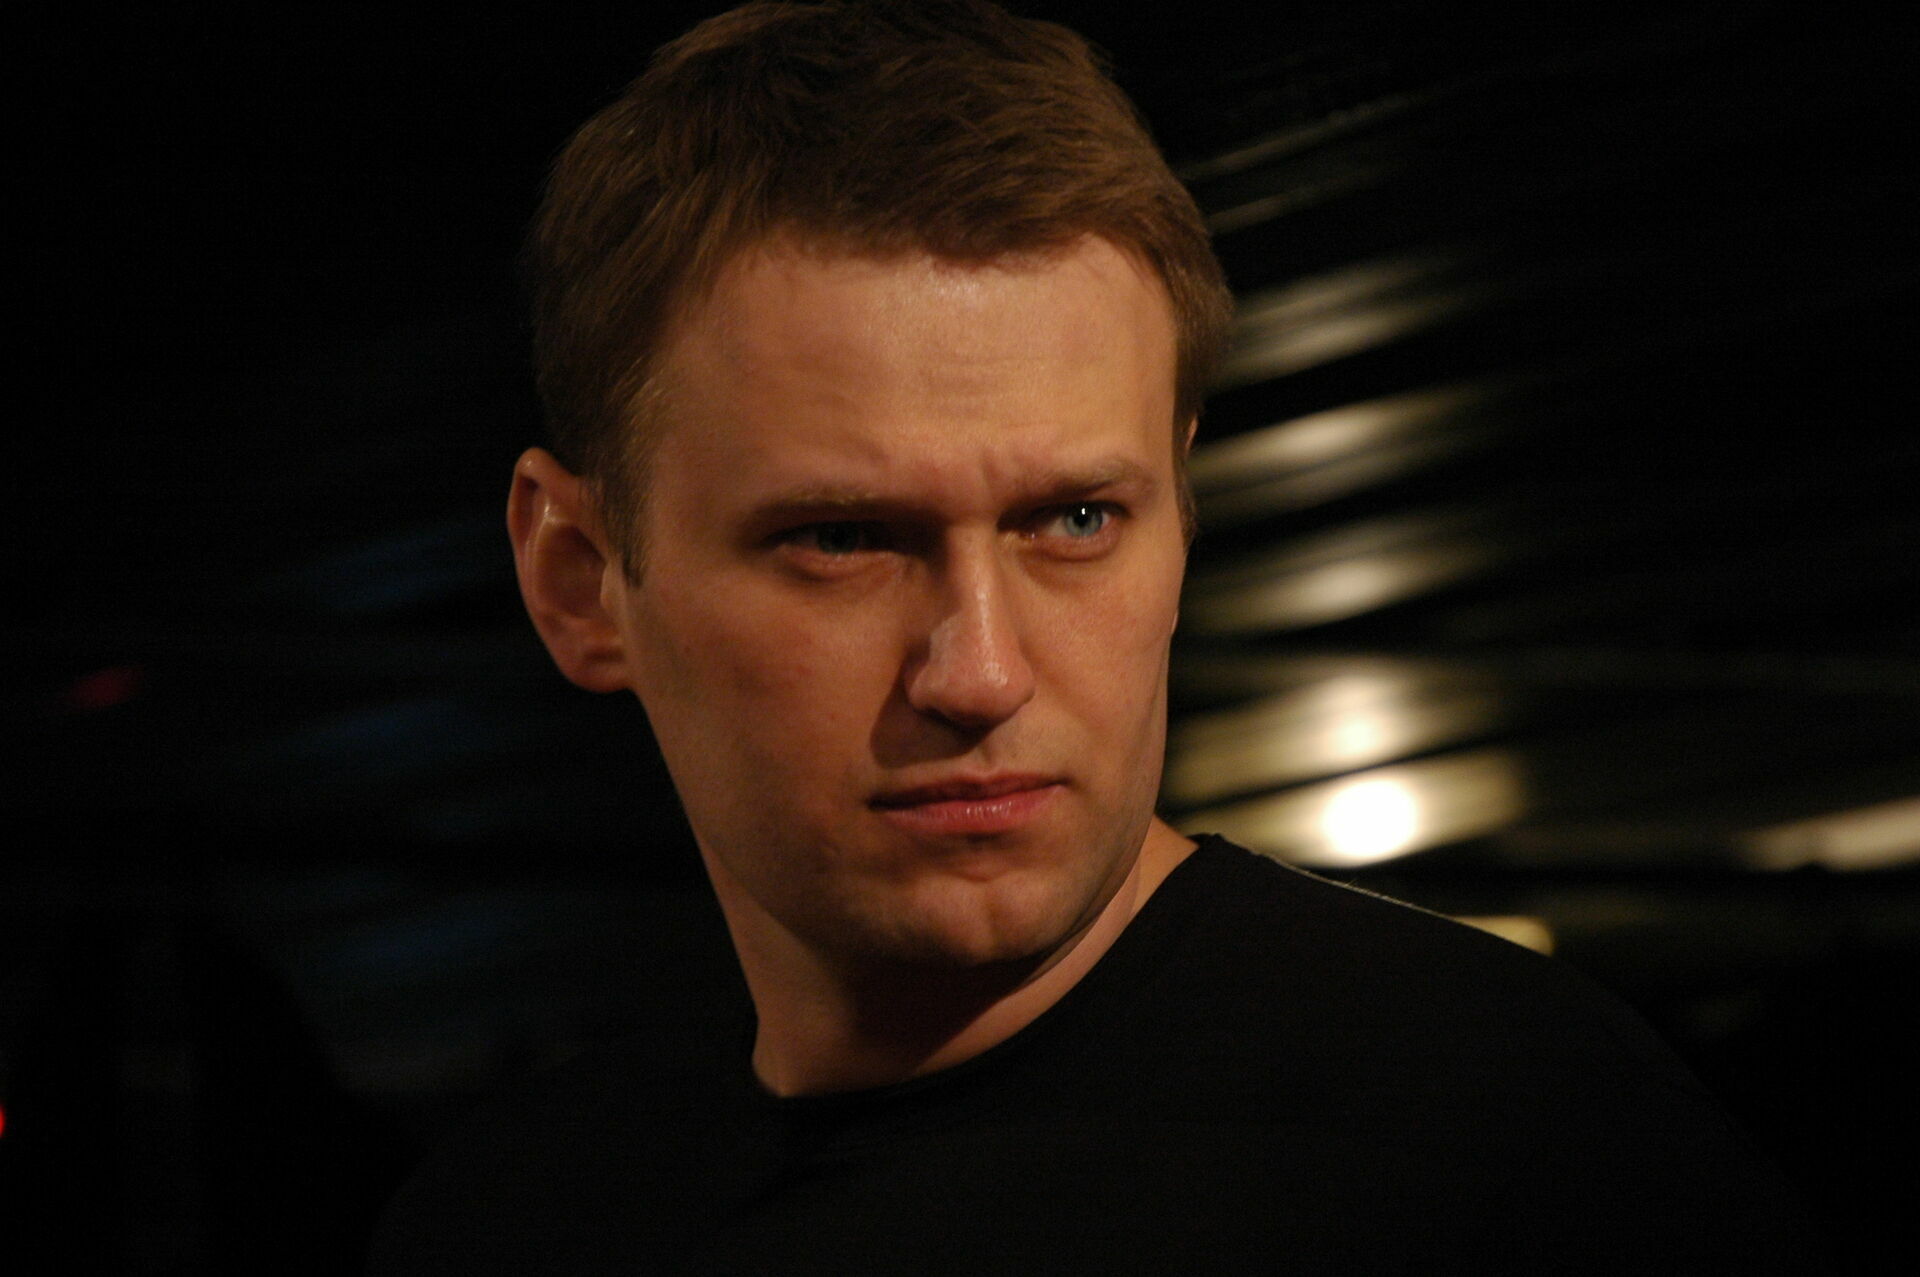 New EU sanctions against Russia will be named after Navalny